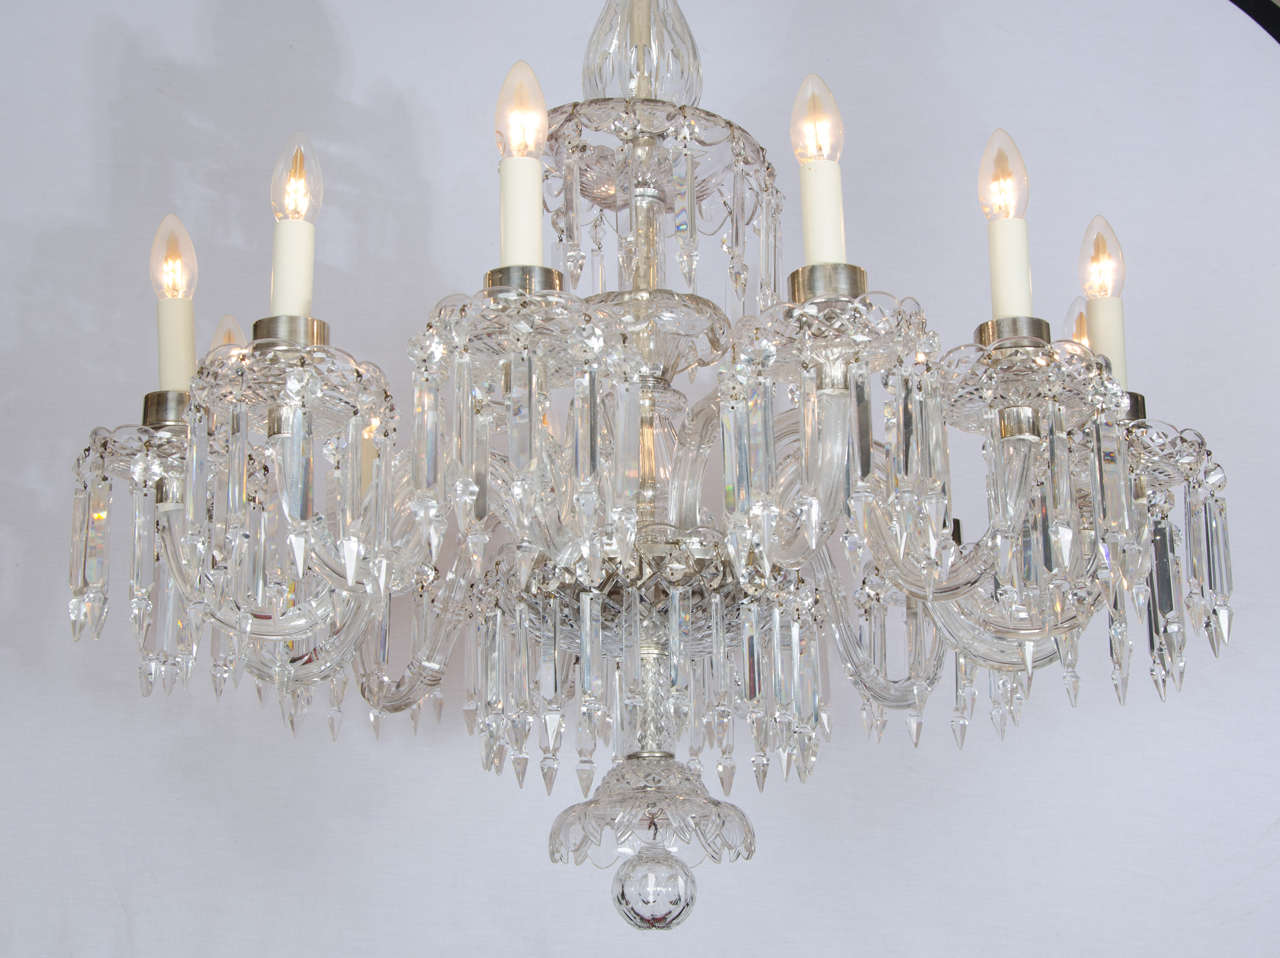 This elegant French crystal and glass chandelier has a single tier of 12 branches, arranged closely together for a full and lavish body of light. The crystal arms are supported in an ornate central column and showcase 12 candle shaped light fittings